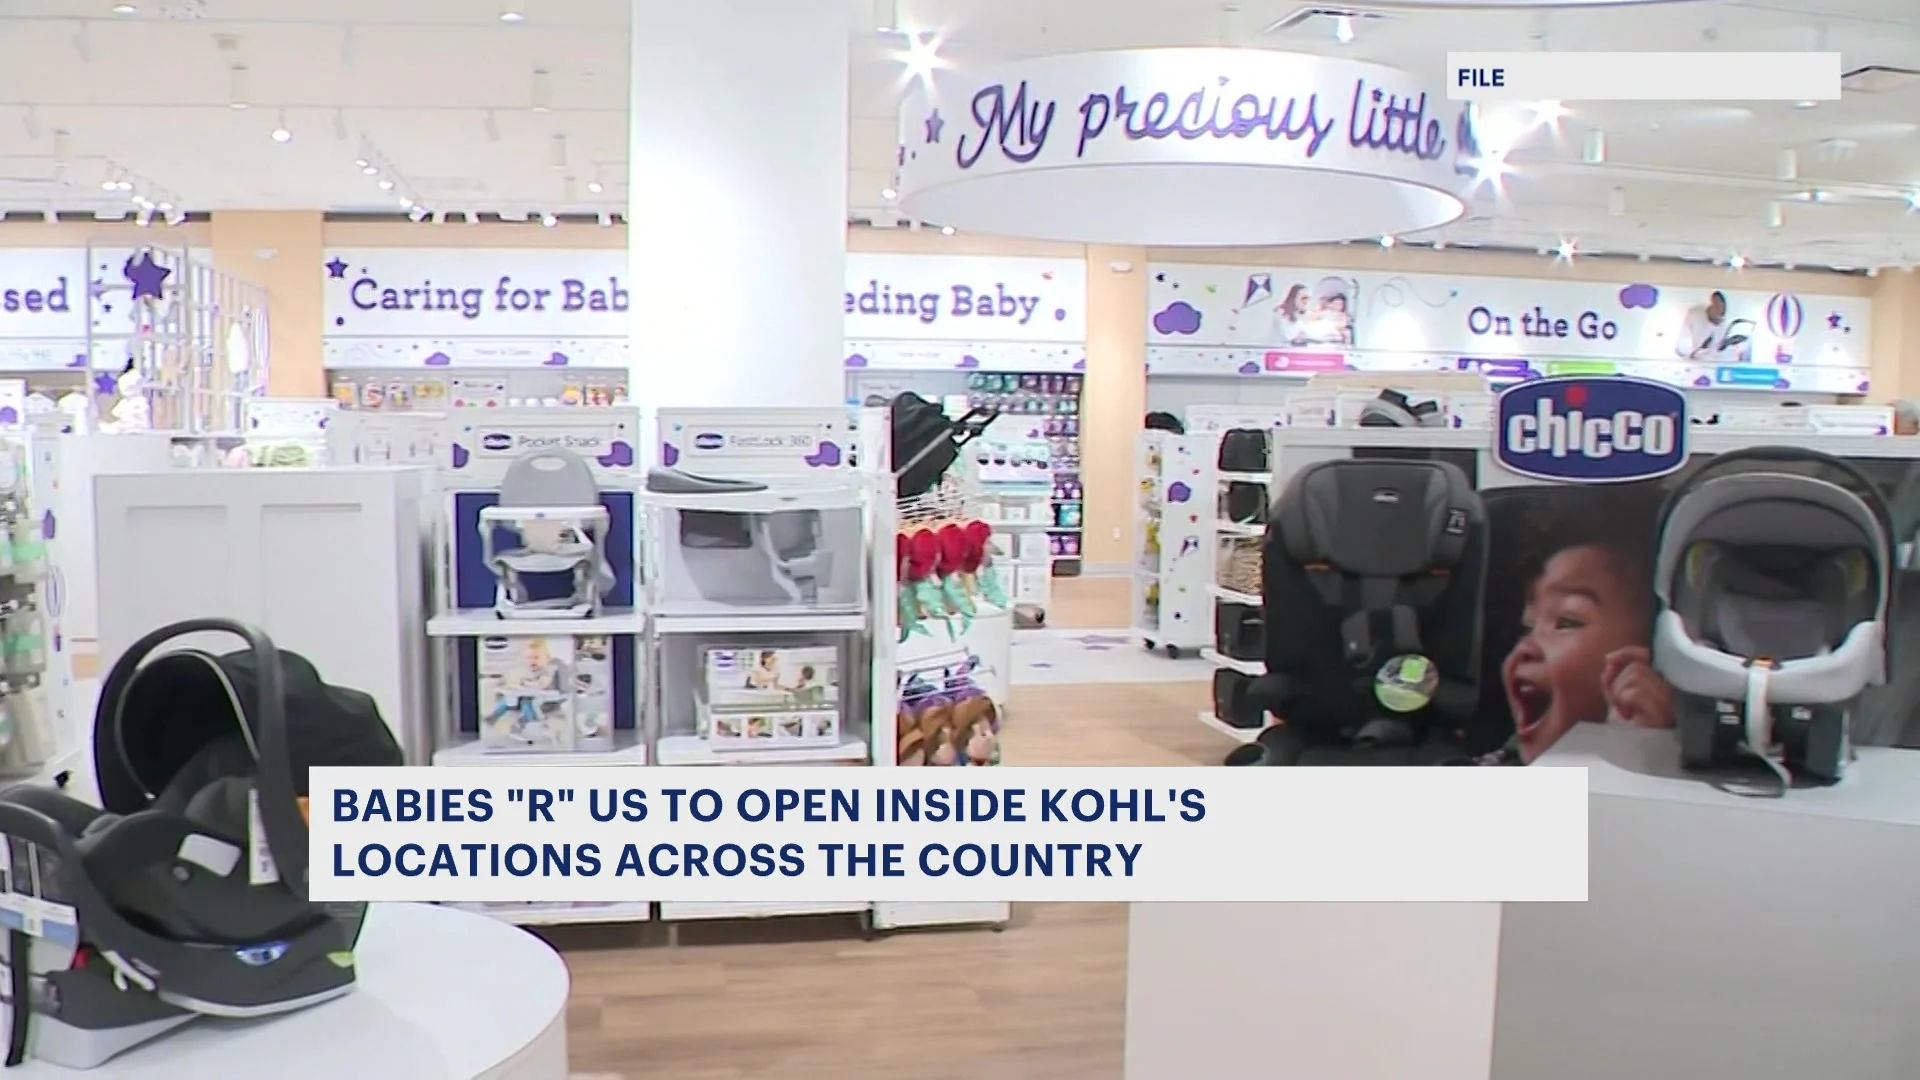 13 Kohl's in New Jersey to open Babies'R'Us locations. See list of stores